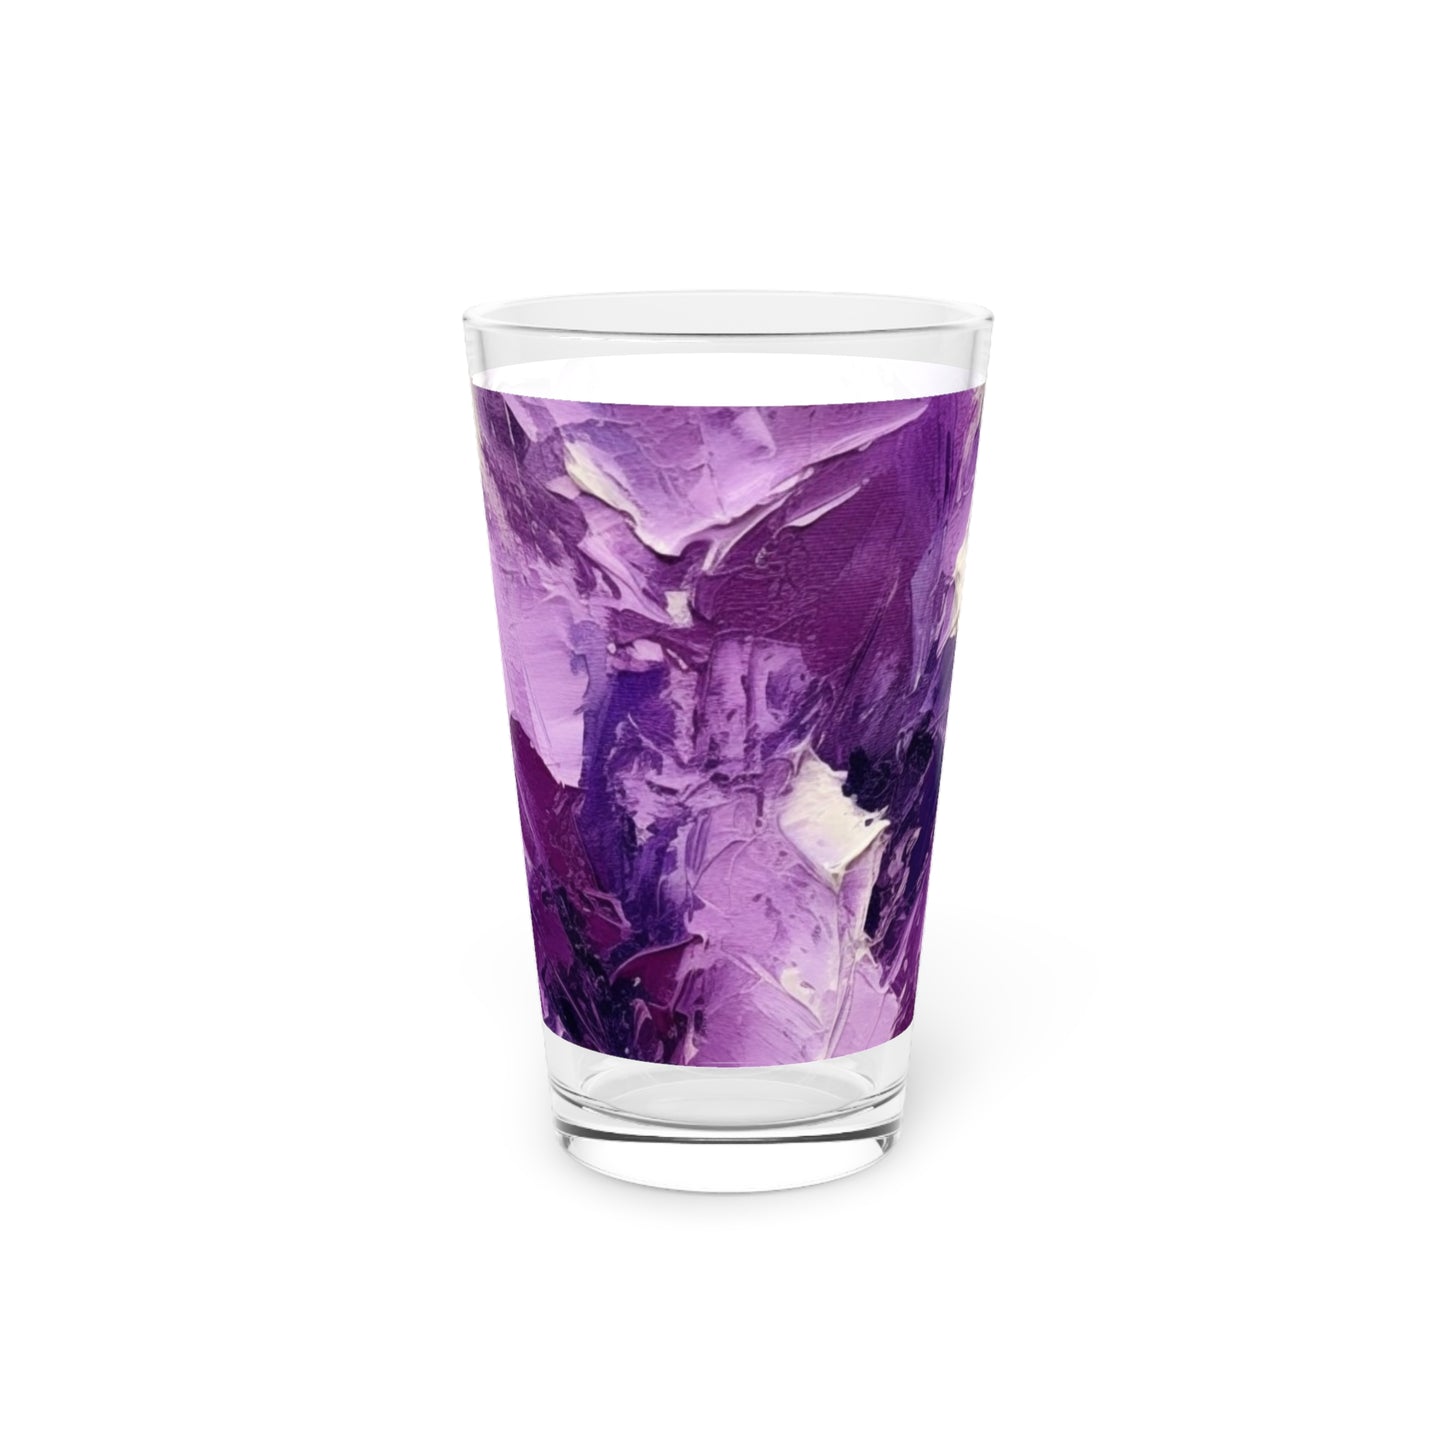 Pint Glass with Serene Lavender Painting: Embrace the Tranquility